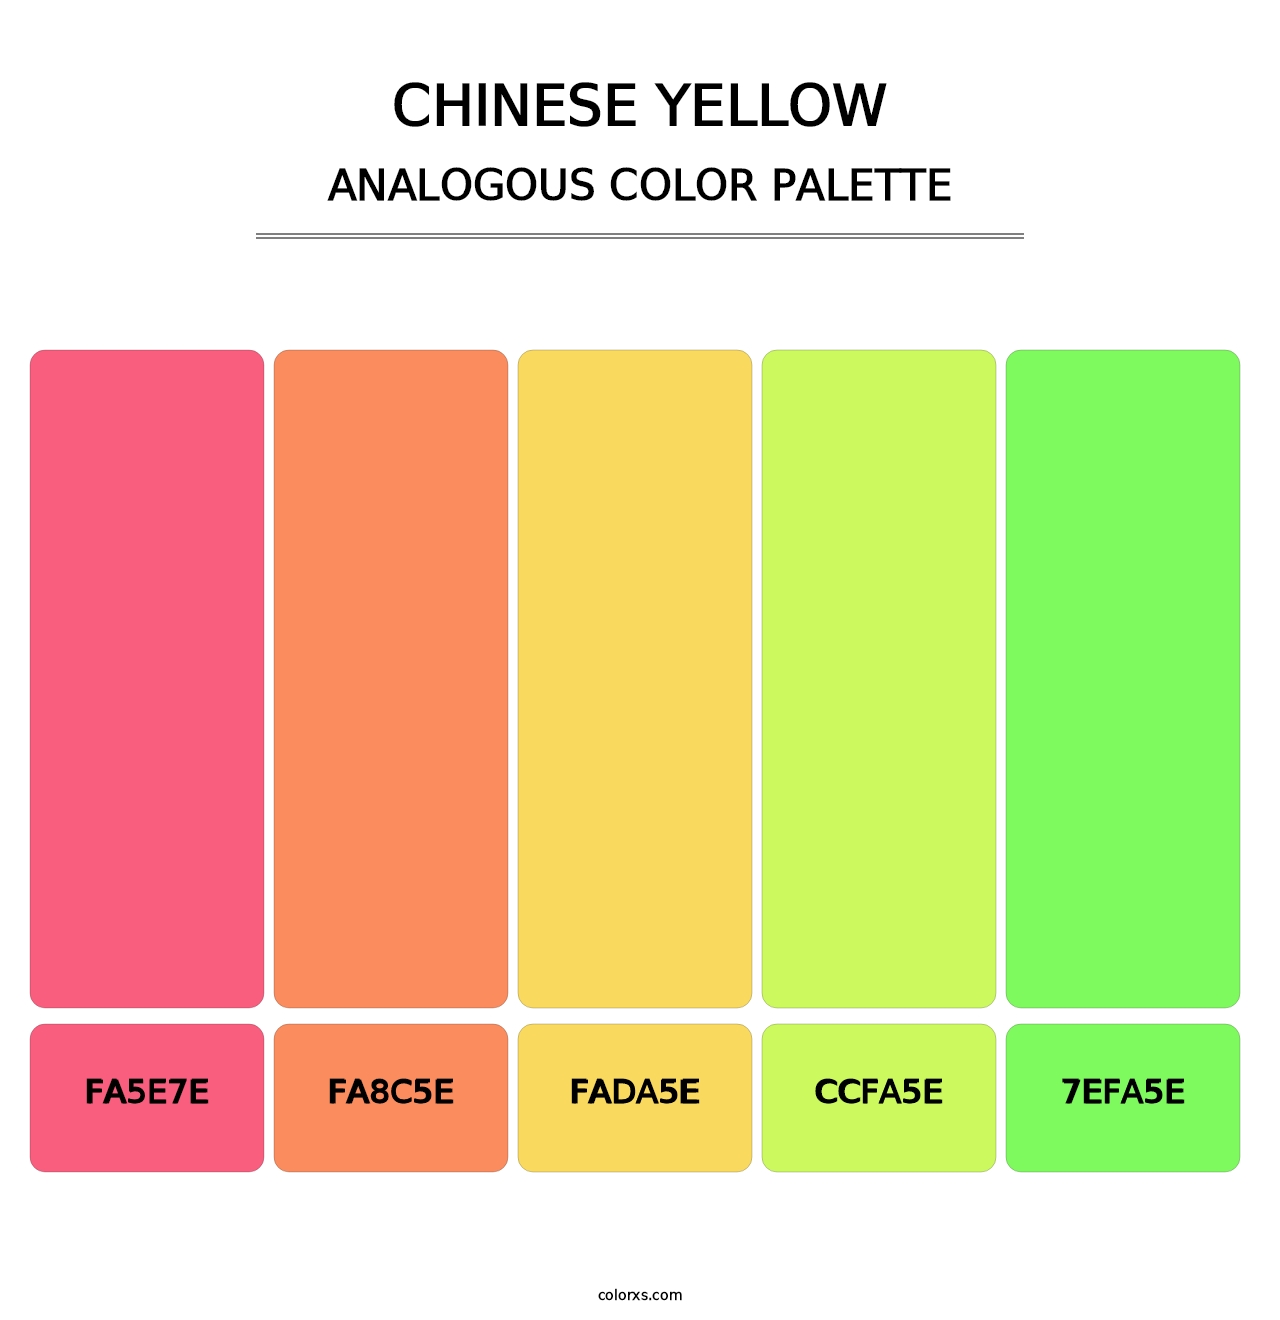 Chinese Yellow - Analogous Color Palette